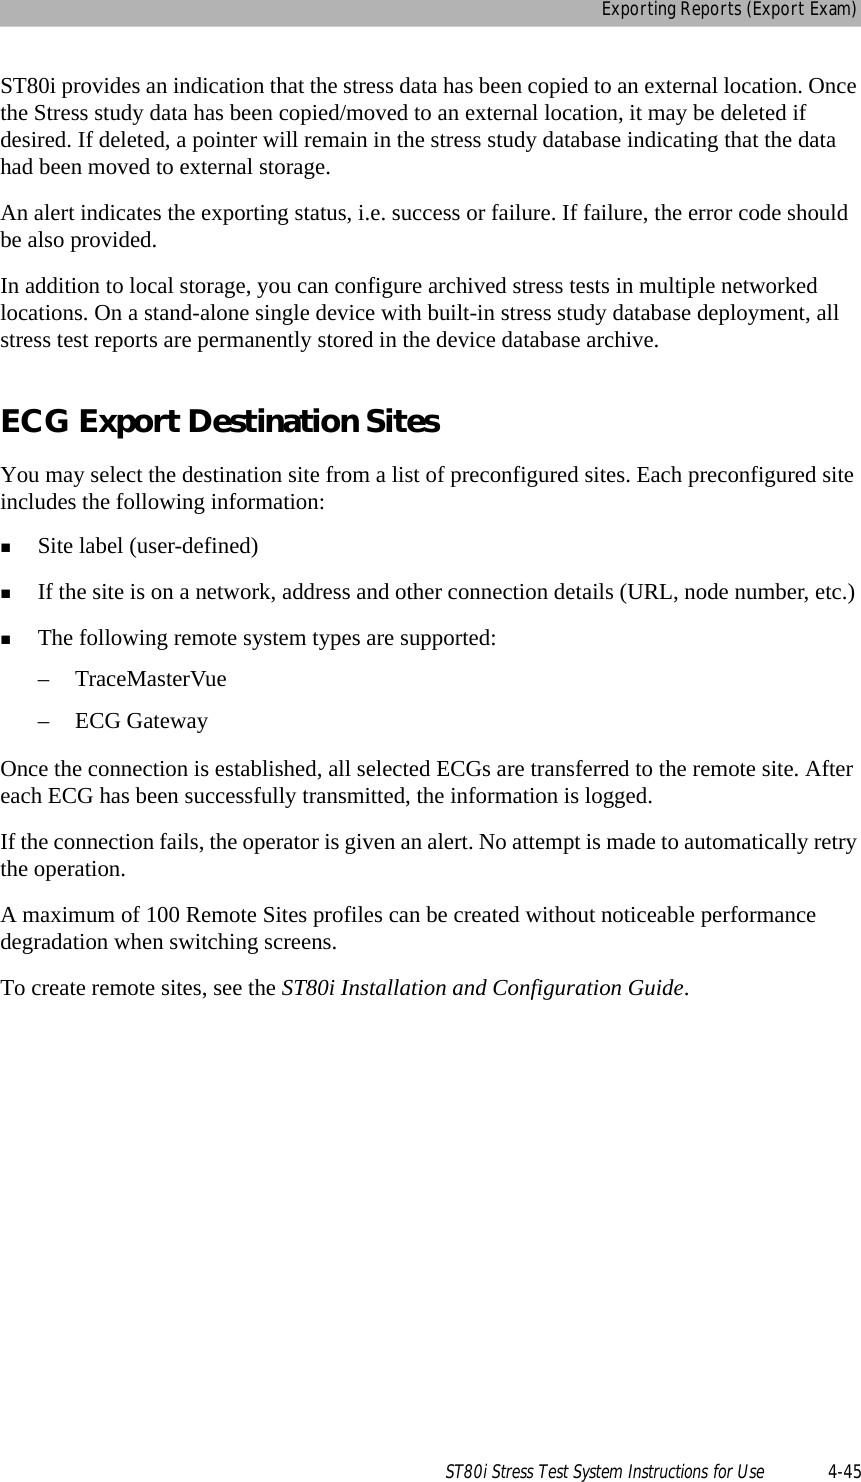 Exporting Reports (Export Exam)ST80i Stress Test System Instructions for Use 4-45ST80i provides an indication that the stress data has been copied to an external location. Once the Stress study data has been copied/moved to an external location, it may be deleted if desired. If deleted, a pointer will remain in the stress study database indicating that the data had been moved to external storage. An alert indicates the exporting status, i.e. success or failure. If failure, the error code should be also provided.In addition to local storage, you can configure archived stress tests in multiple networked locations. On a stand-alone single device with built-in stress study database deployment, all stress test reports are permanently stored in the device database archive. ECG Export Destination SitesYou may select the destination site from a list of preconfigured sites. Each preconfigured site includes the following information: Site label (user-defined)If the site is on a network, address and other connection details (URL, node number, etc.)The following remote system types are supported:– TraceMasterVue–ECG GatewayOnce the connection is established, all selected ECGs are transferred to the remote site. After each ECG has been successfully transmitted, the information is logged.  If the connection fails, the operator is given an alert. No attempt is made to automatically retry the operation. A maximum of 100 Remote Sites profiles can be created without noticeable performance degradation when switching screens. To create remote sites, see the ST80i Installation and Configuration Guide.